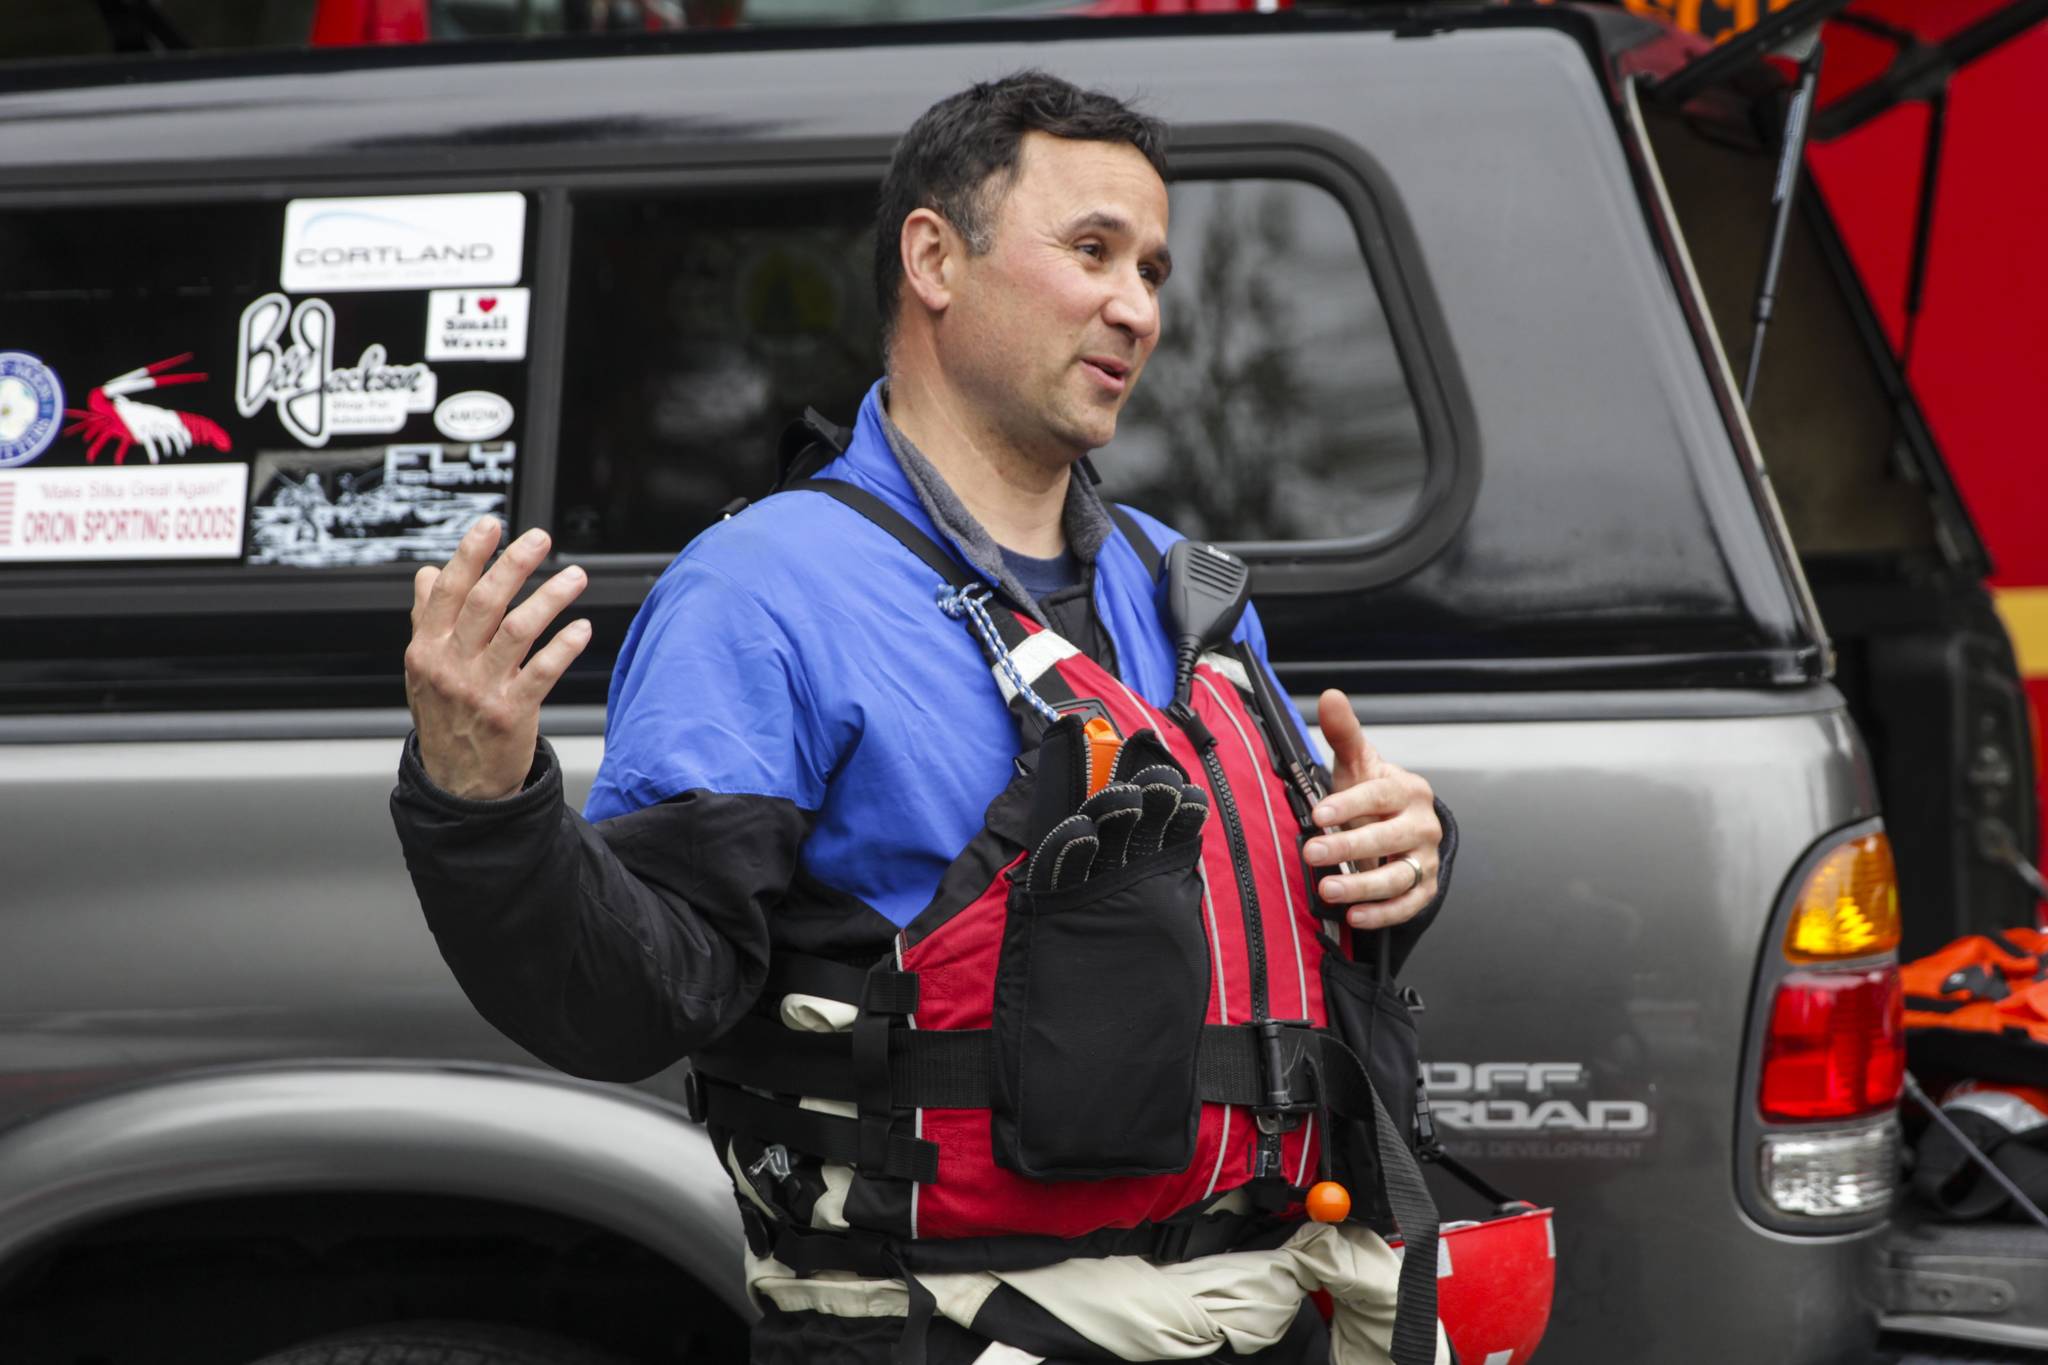 Capt. Jayme Johns, head of the Capital City Fire/Rescue’s water rescue team, briefs a group of CCFR personnel and Coast Guardsmen as they prepare to practice swiftwater rescues in the Mendenhall River on as National Boating Safety Week wraps up May 27, 2021. (Michael S. Lockett / Juneau Empire)